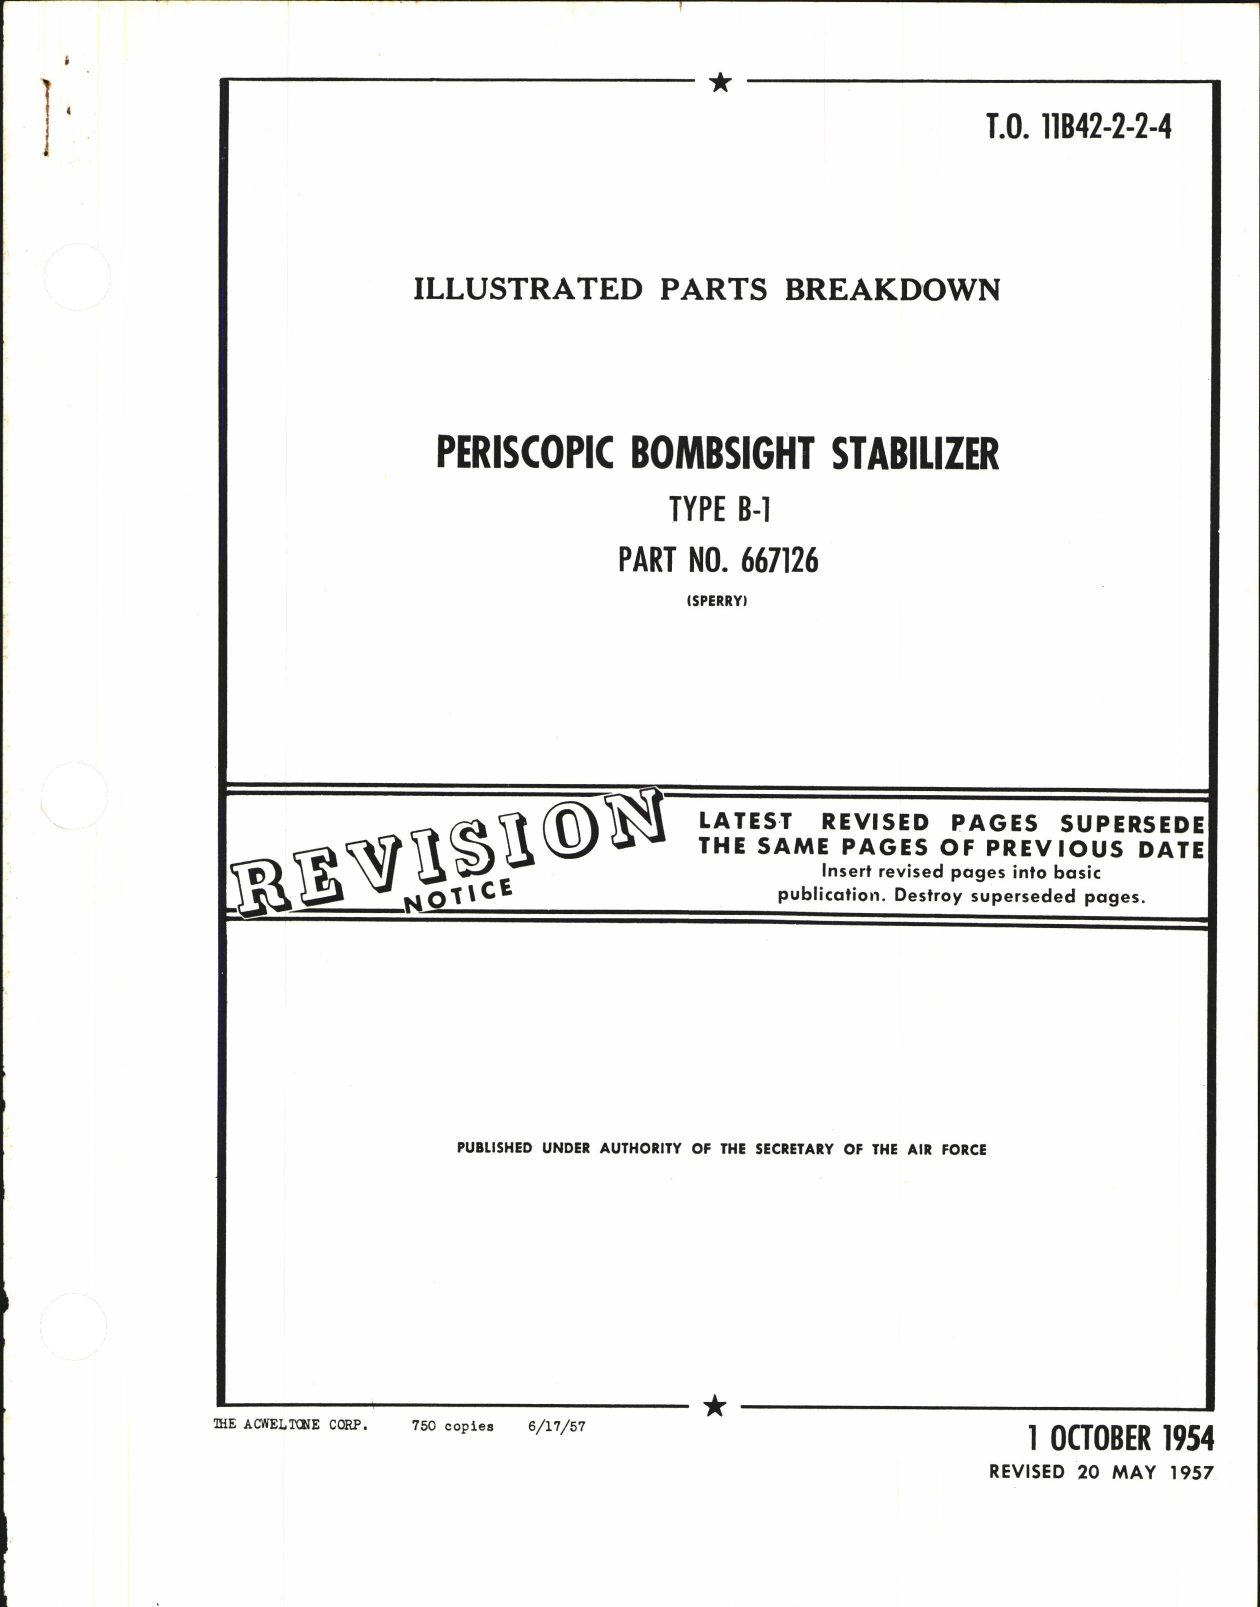 Sample page 1 from AirCorps Library document: Illustrated Parts Breakdown for Periscopic Bombsight Stabilizer Type B-1 Part No. 667126